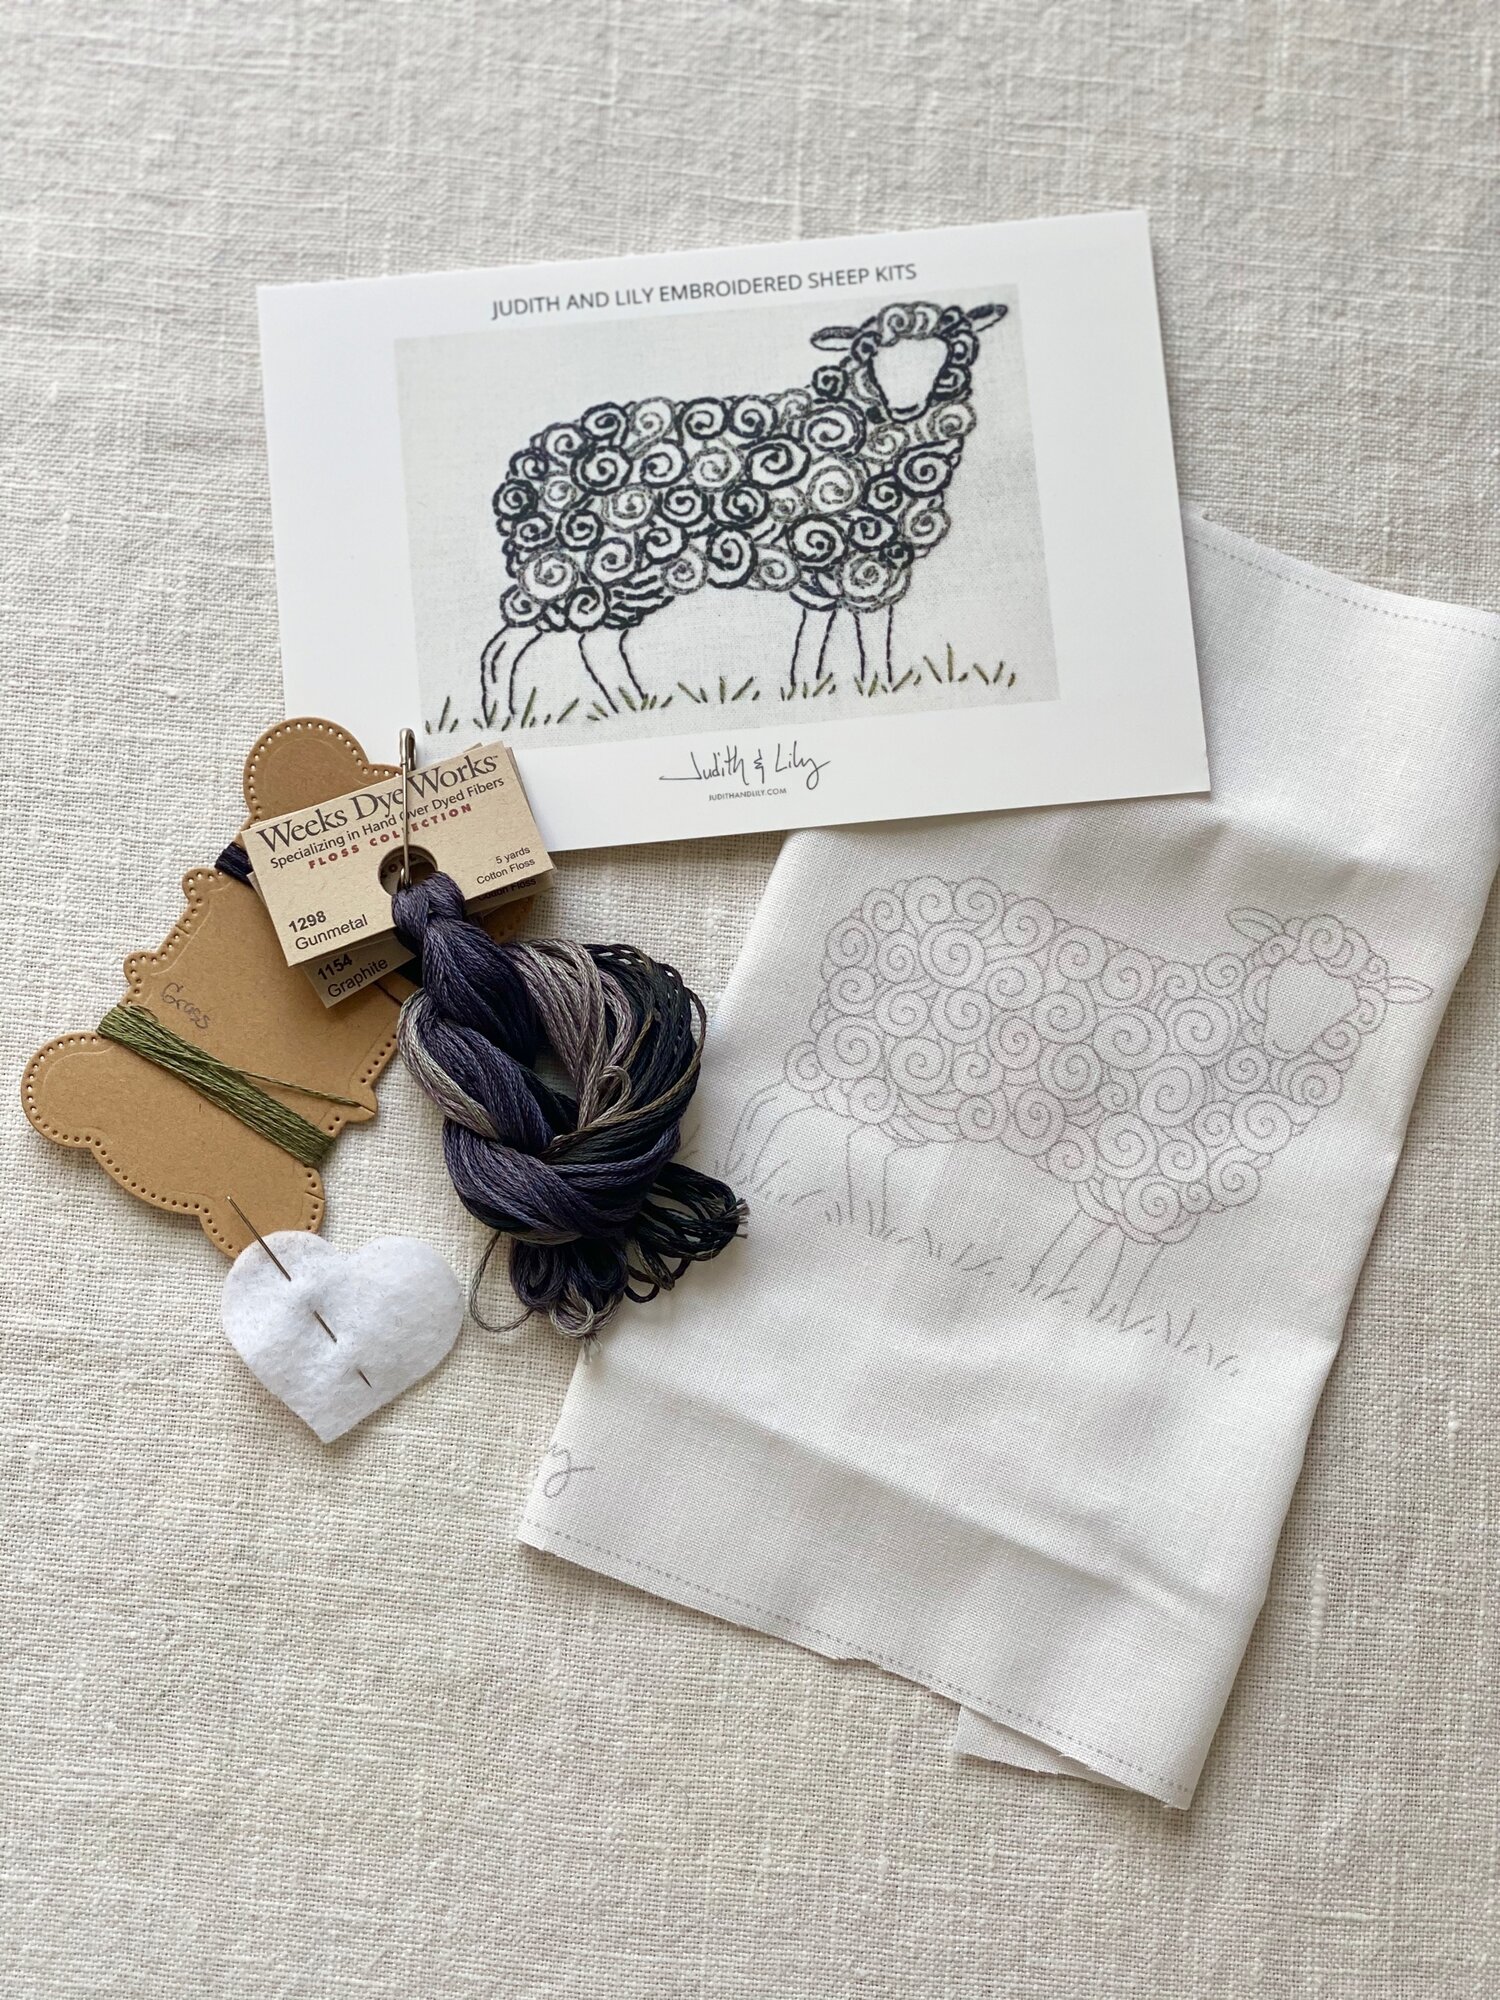 Sheep Embroidery Floss Holder - Trimits